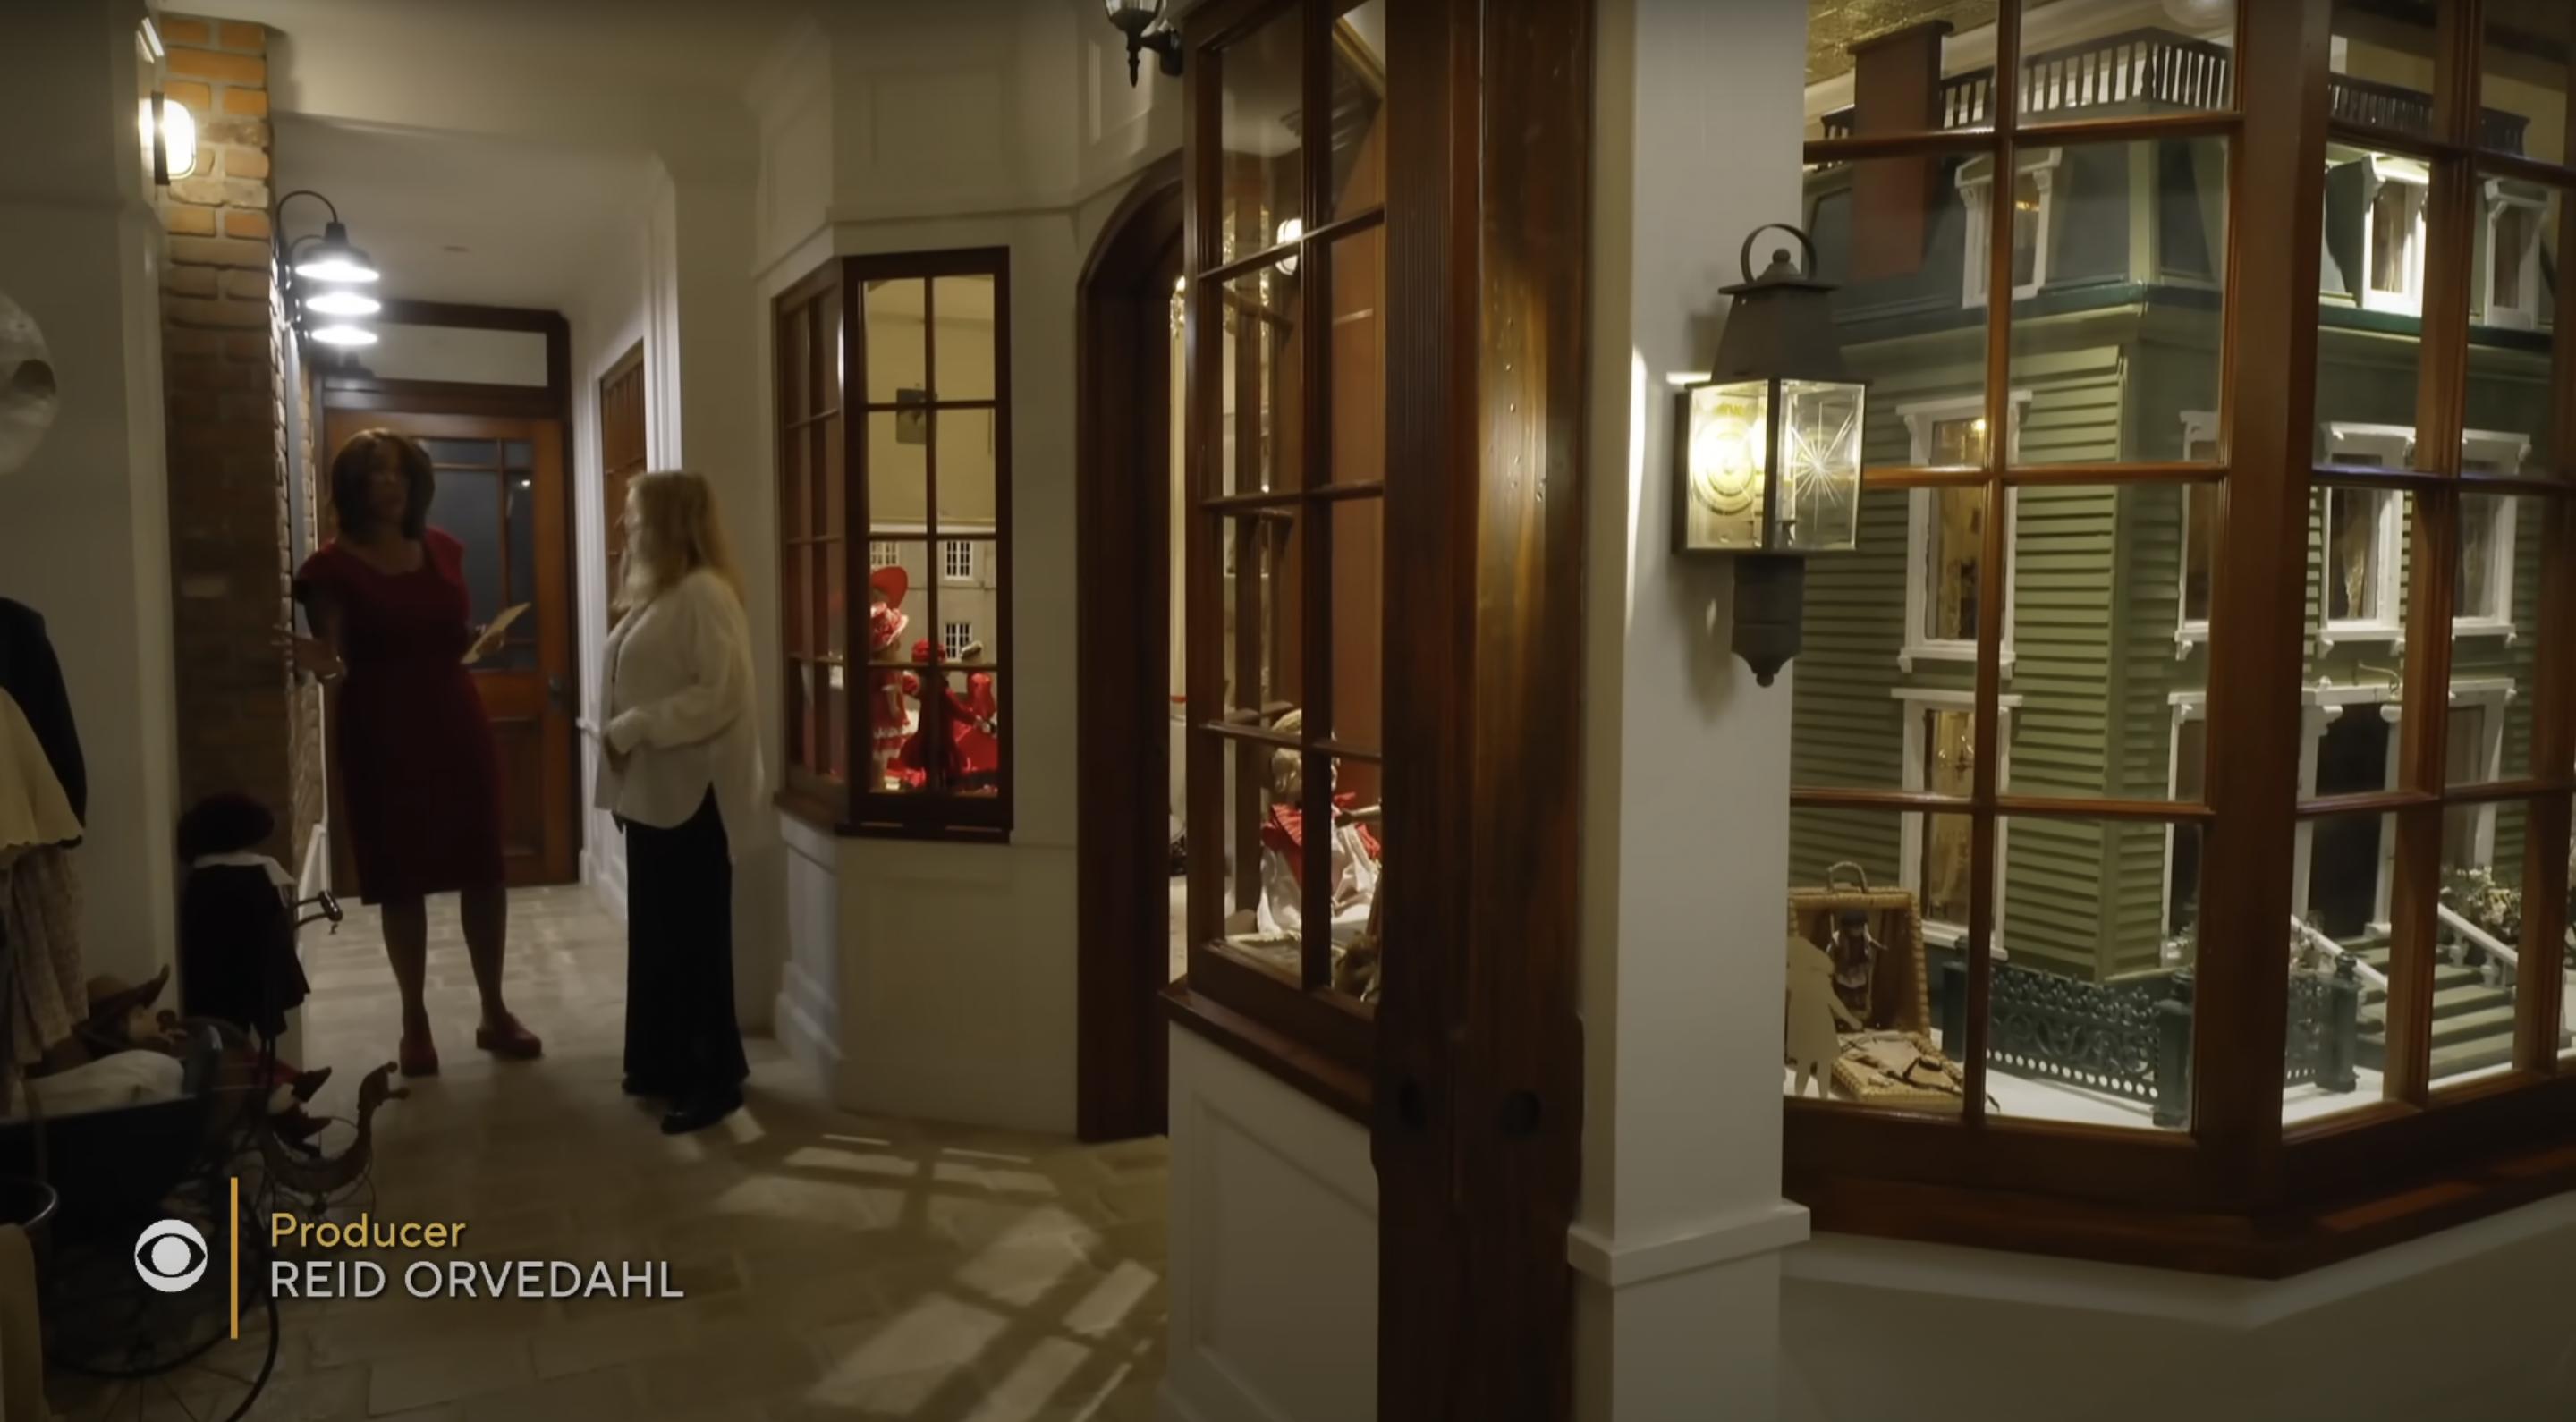 Barbra Streisand showing Gayle King around her home, posted on November 5, 2023 | Source: YouTube/CBS Sunday Morning